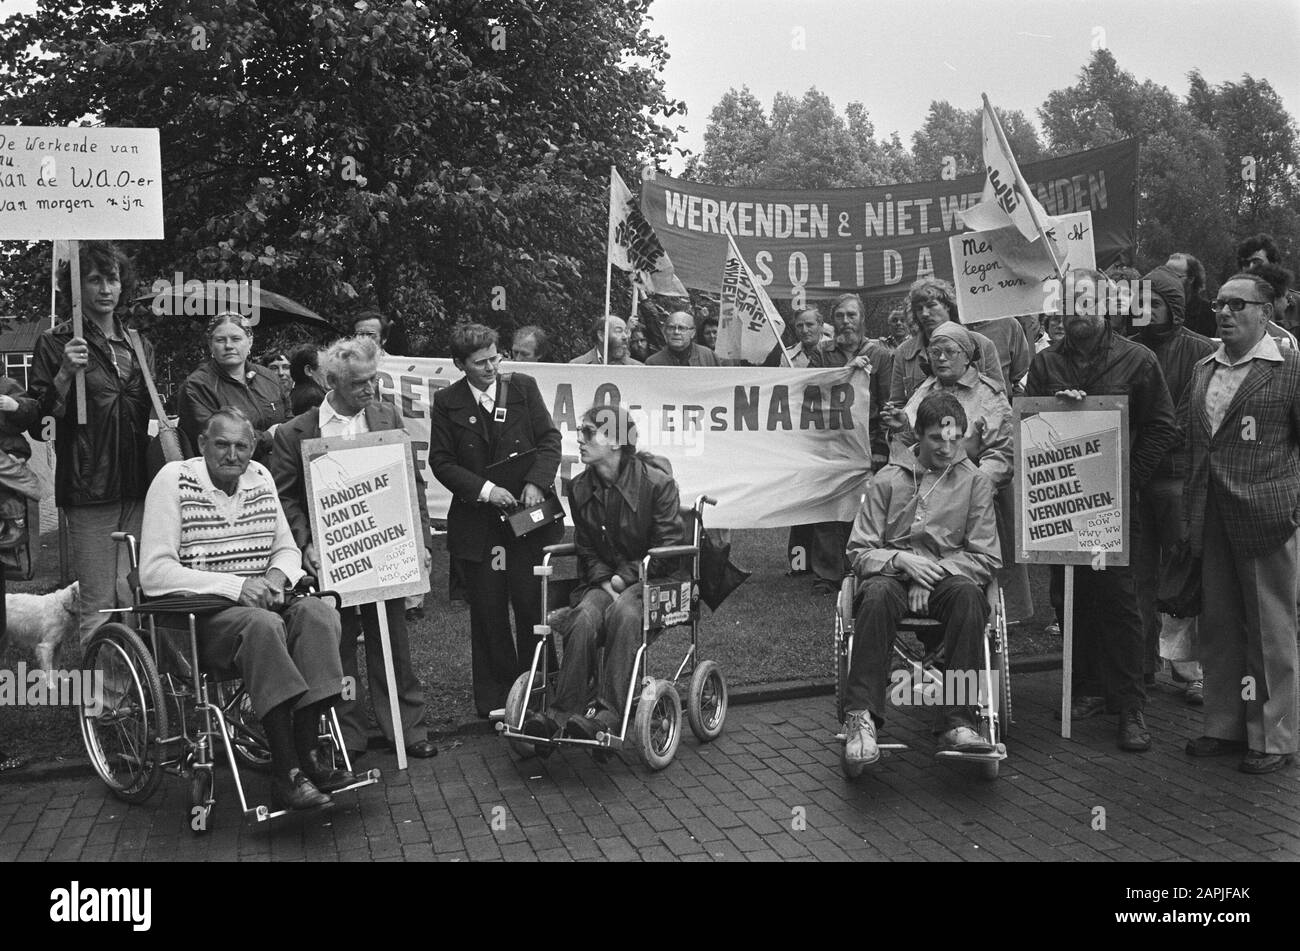 Protest of WAOers for the Joint Administration Office building in Amsterdam against austerity plans Description: demonstrators, cuts, disability, wheelchairs, banners Date: September 10 1980 Location: Amsterdam, Noord-Holland Keywords: incapacity for work, cuts, protesters, wheelchairs, banners Stock Photo